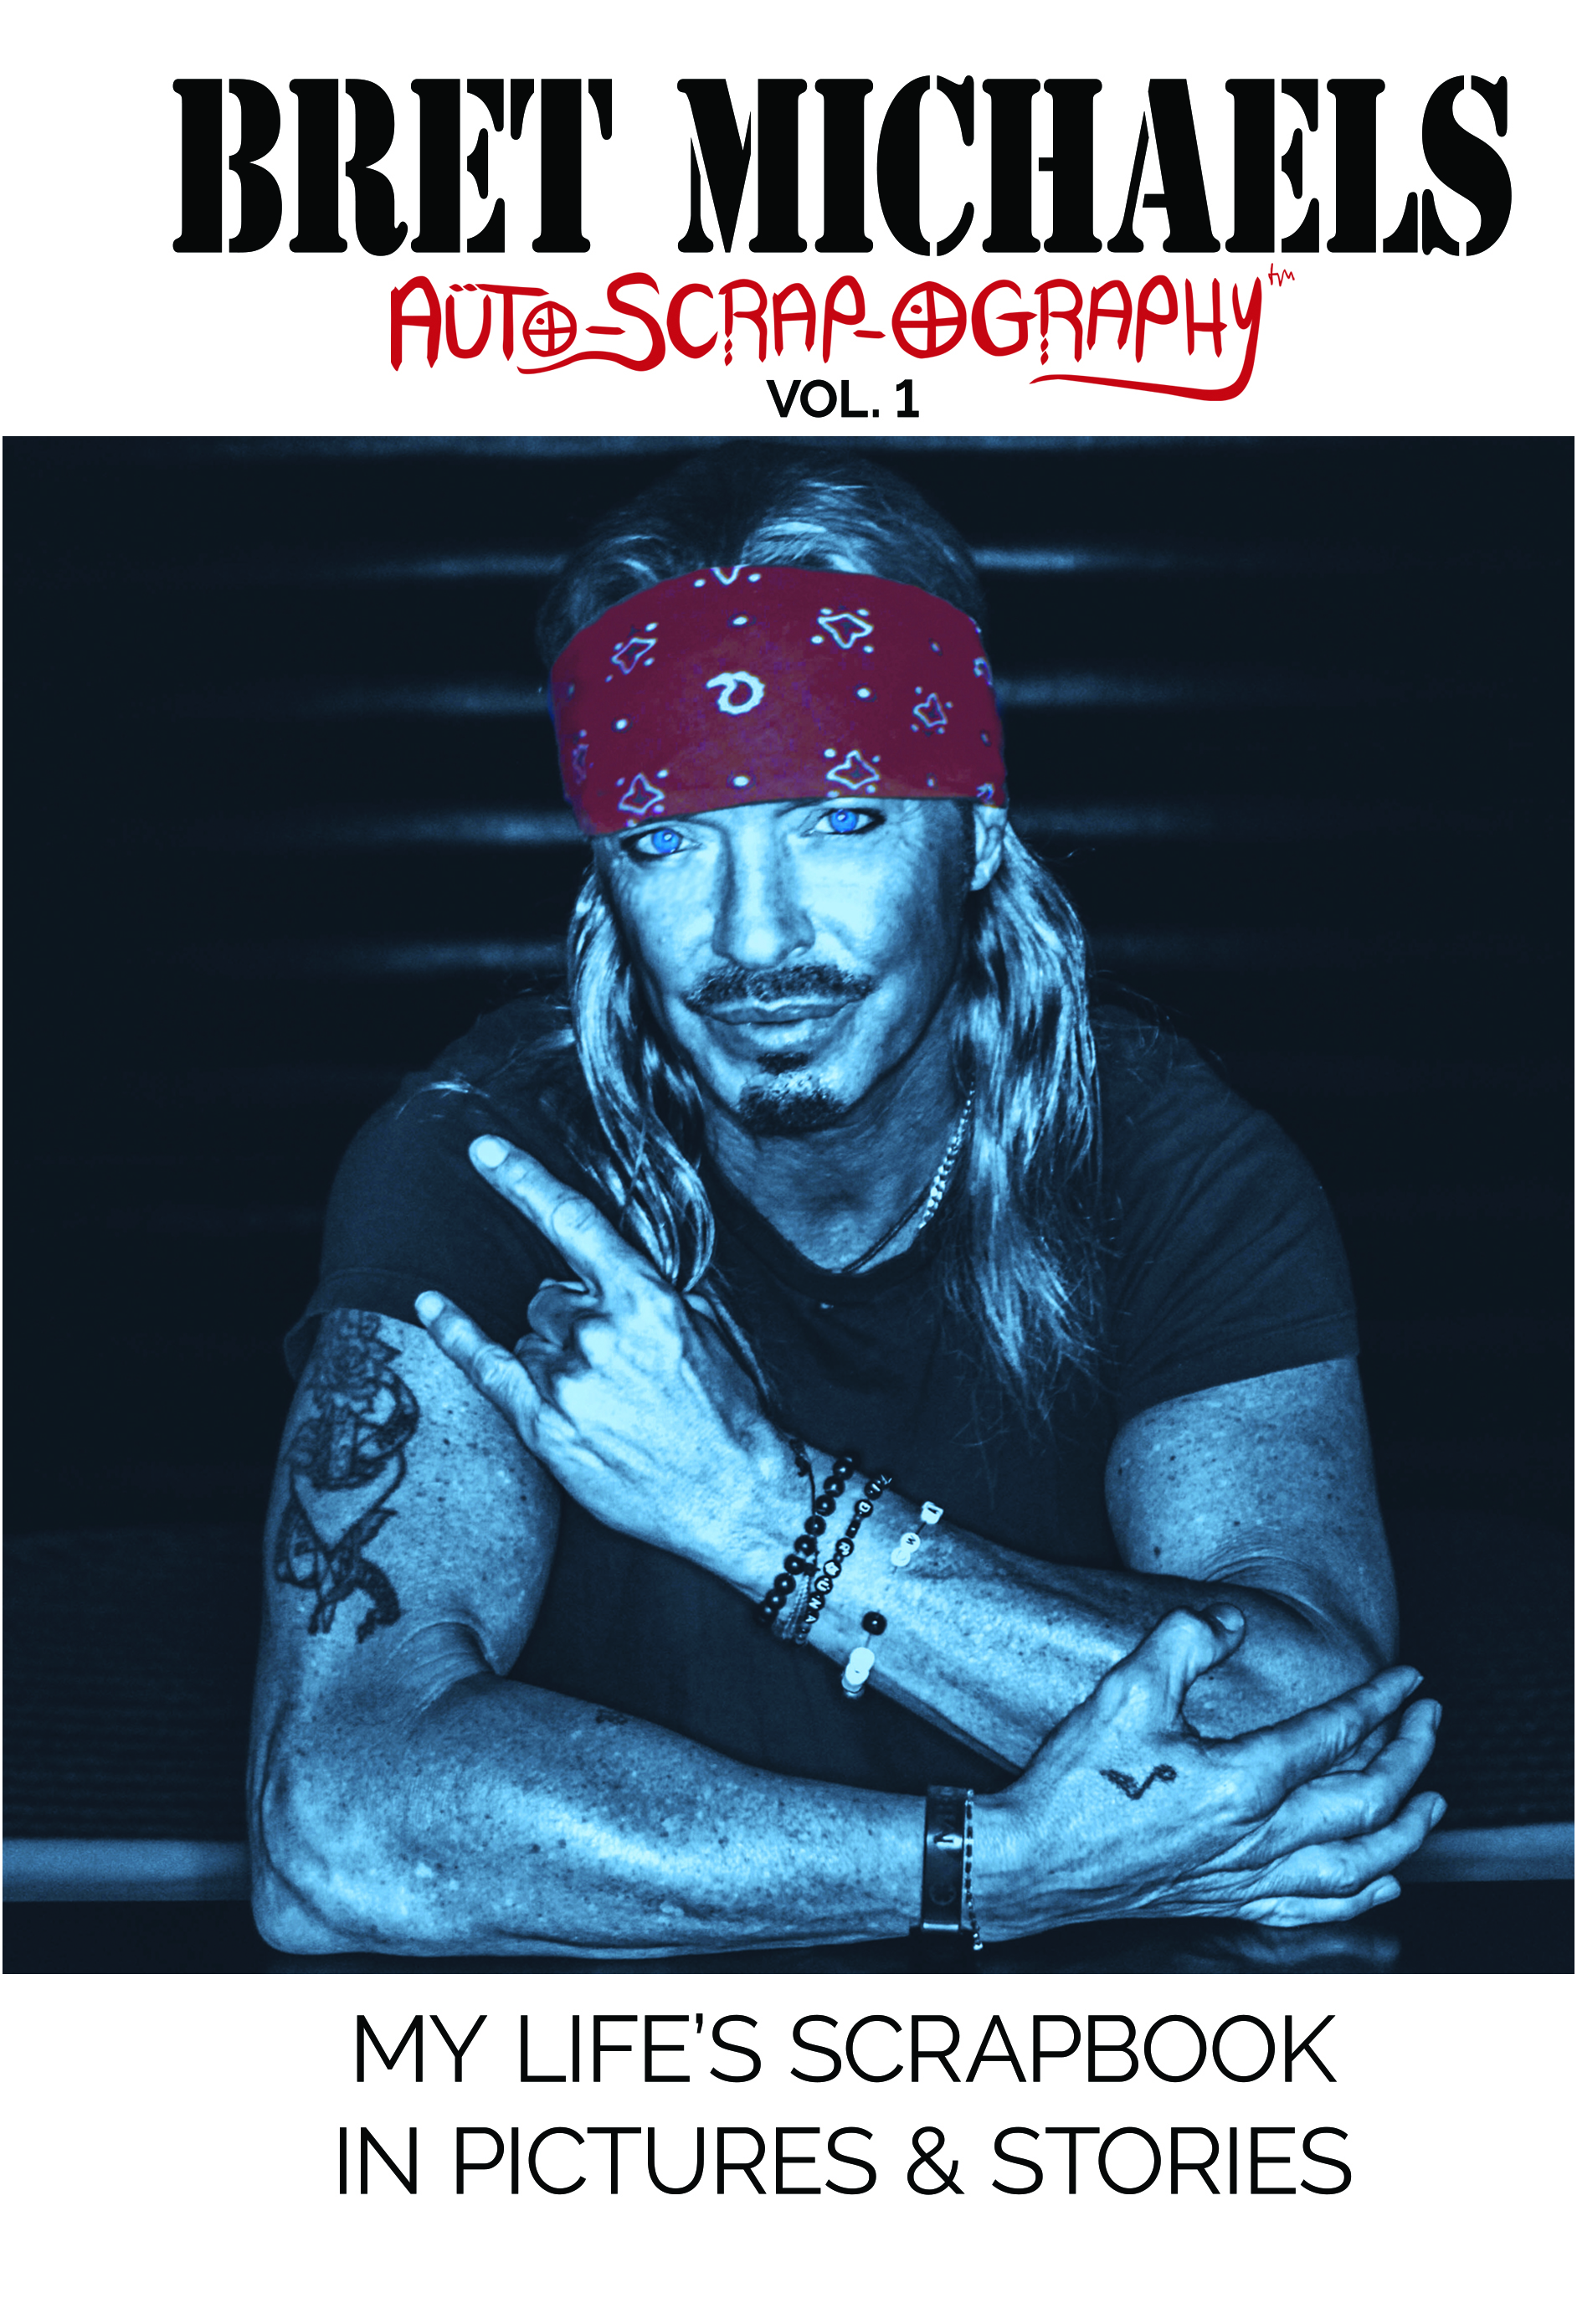 HARDCOVER Bret Michaels Auto-scrap-ography My Life's Scrapbook in Pictures and Stories  Hardcover, Bret Michaels, Brett Michaels, Bret Micheals, Brett Micheals, Book, Autobiography, pictures and stories, auto-scrap-ography, autoscrapography